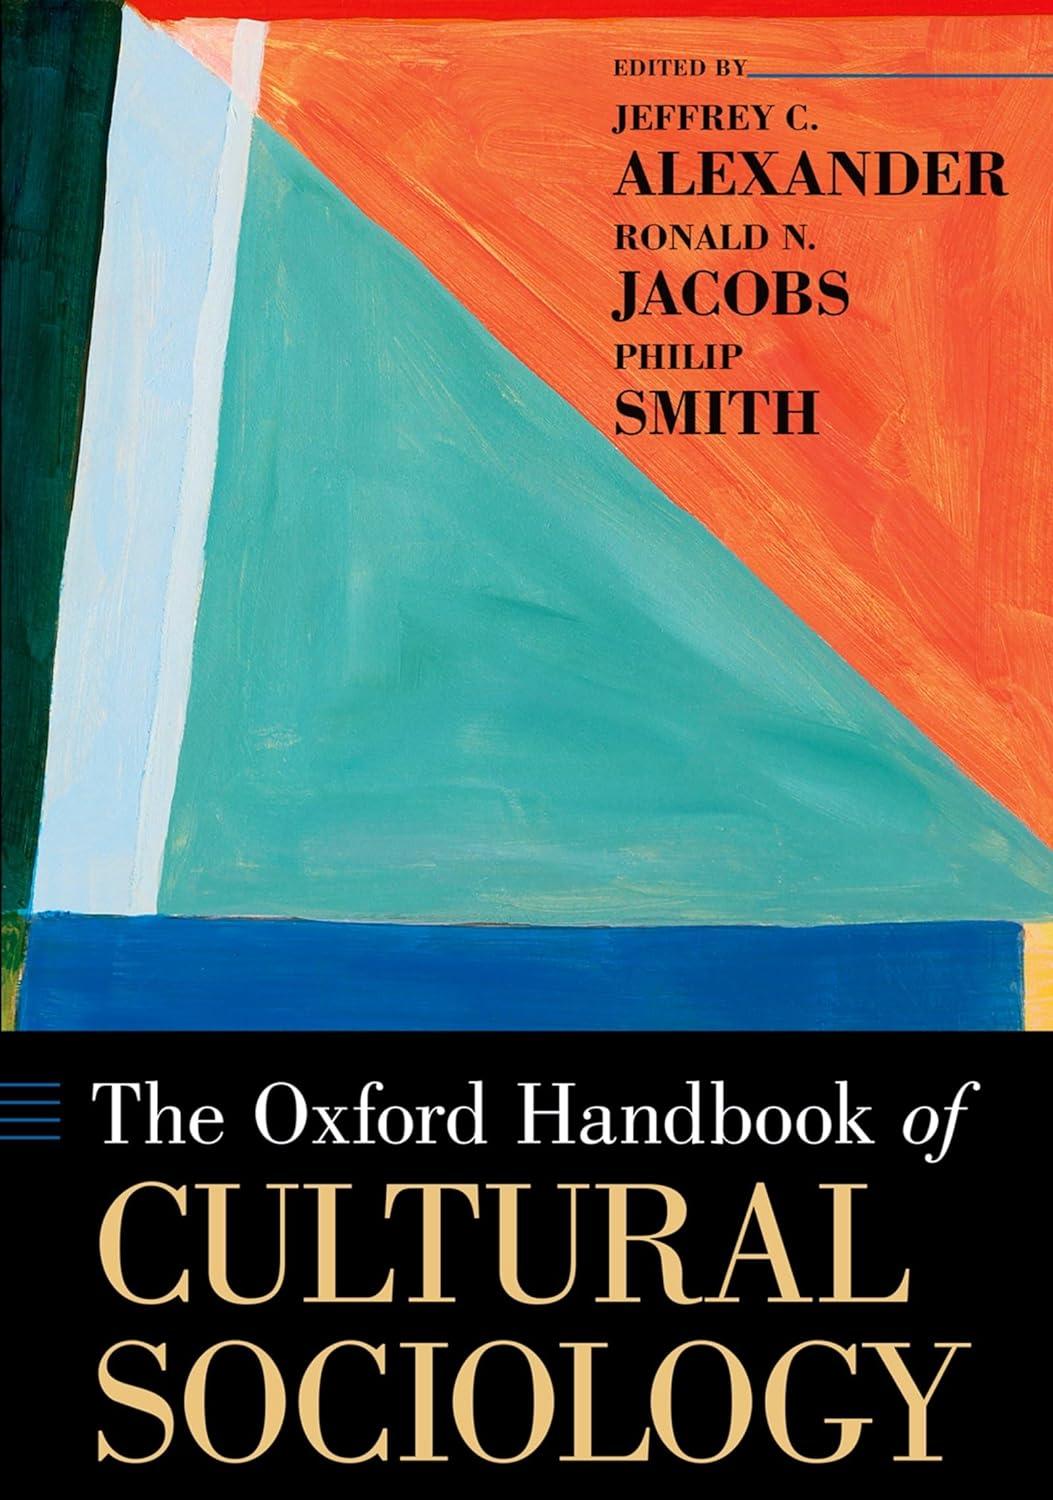 the oxford handbook of cultural sociology 1st edition jeffrey c. alexander, ronald jacobs, philip smith